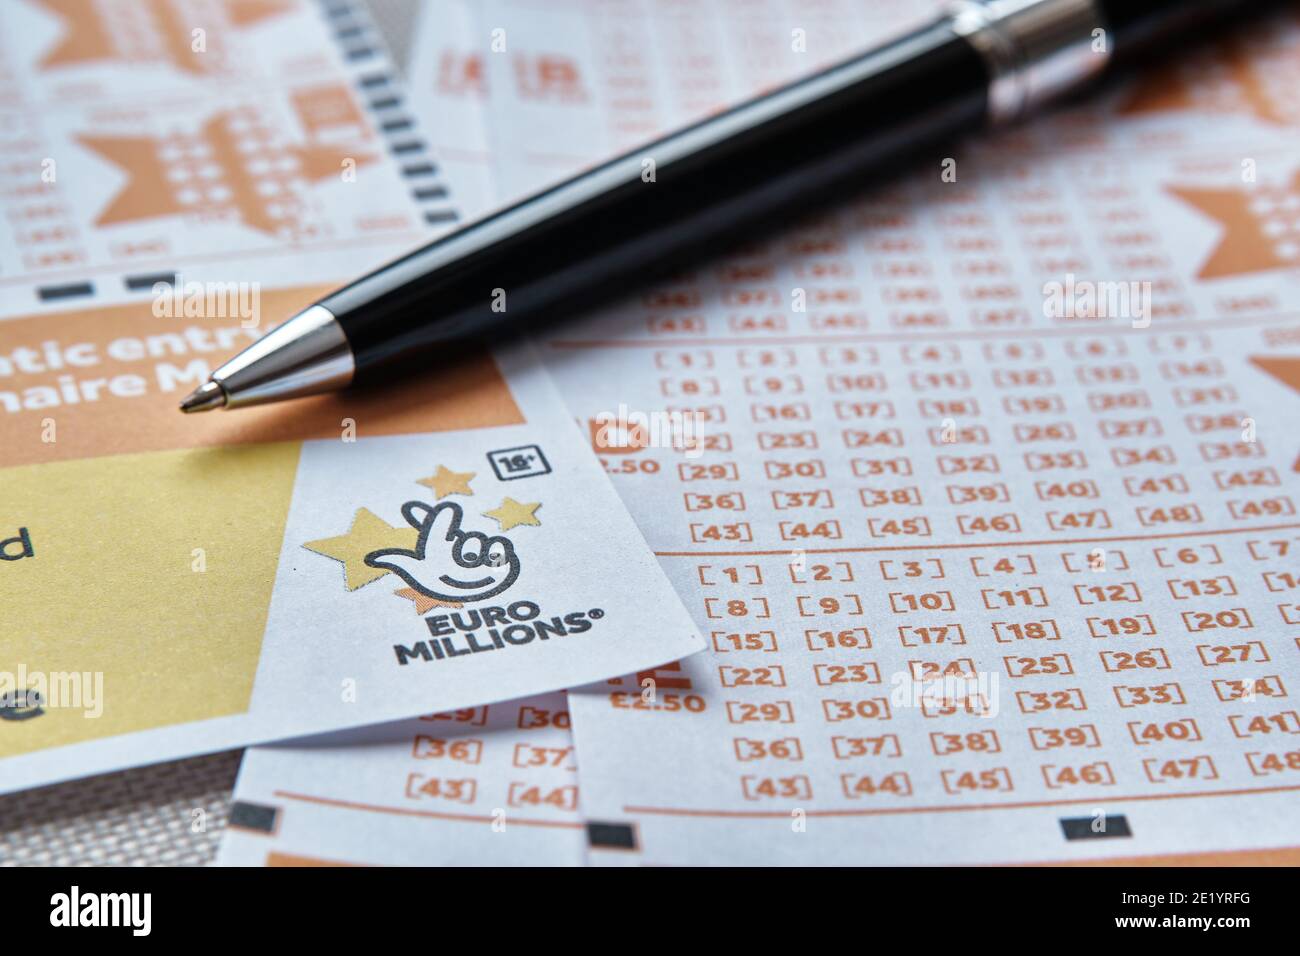 Stafford, United Kingdom - November 10 2020: EuroMillions lottery cards and pen. EuroMillions is Europe's biggest lottery. Concept. Stock Photo